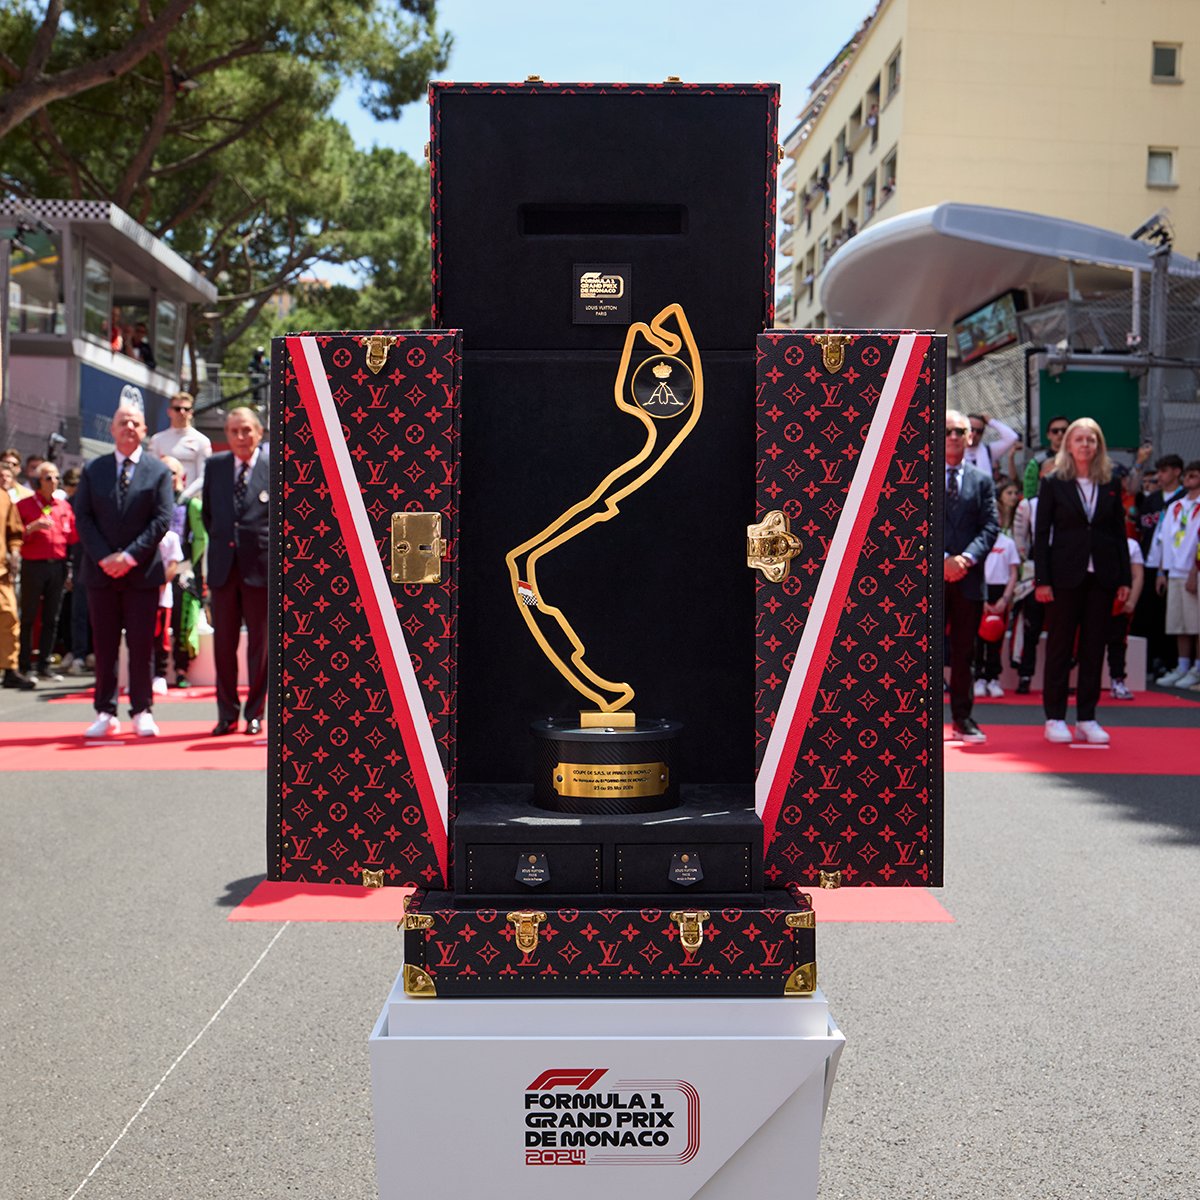 ✨ @ACM_Media 🤝 @LouisVuitton For the 4th year in a row, the Formula 1 Grand Prix de Monaco Trophy was presented this Sunday in its custom-made Louis Vuitton Trophy Trunk 🏆🤩 #MonacoGP #LouisVuitton #MonacoCircuit